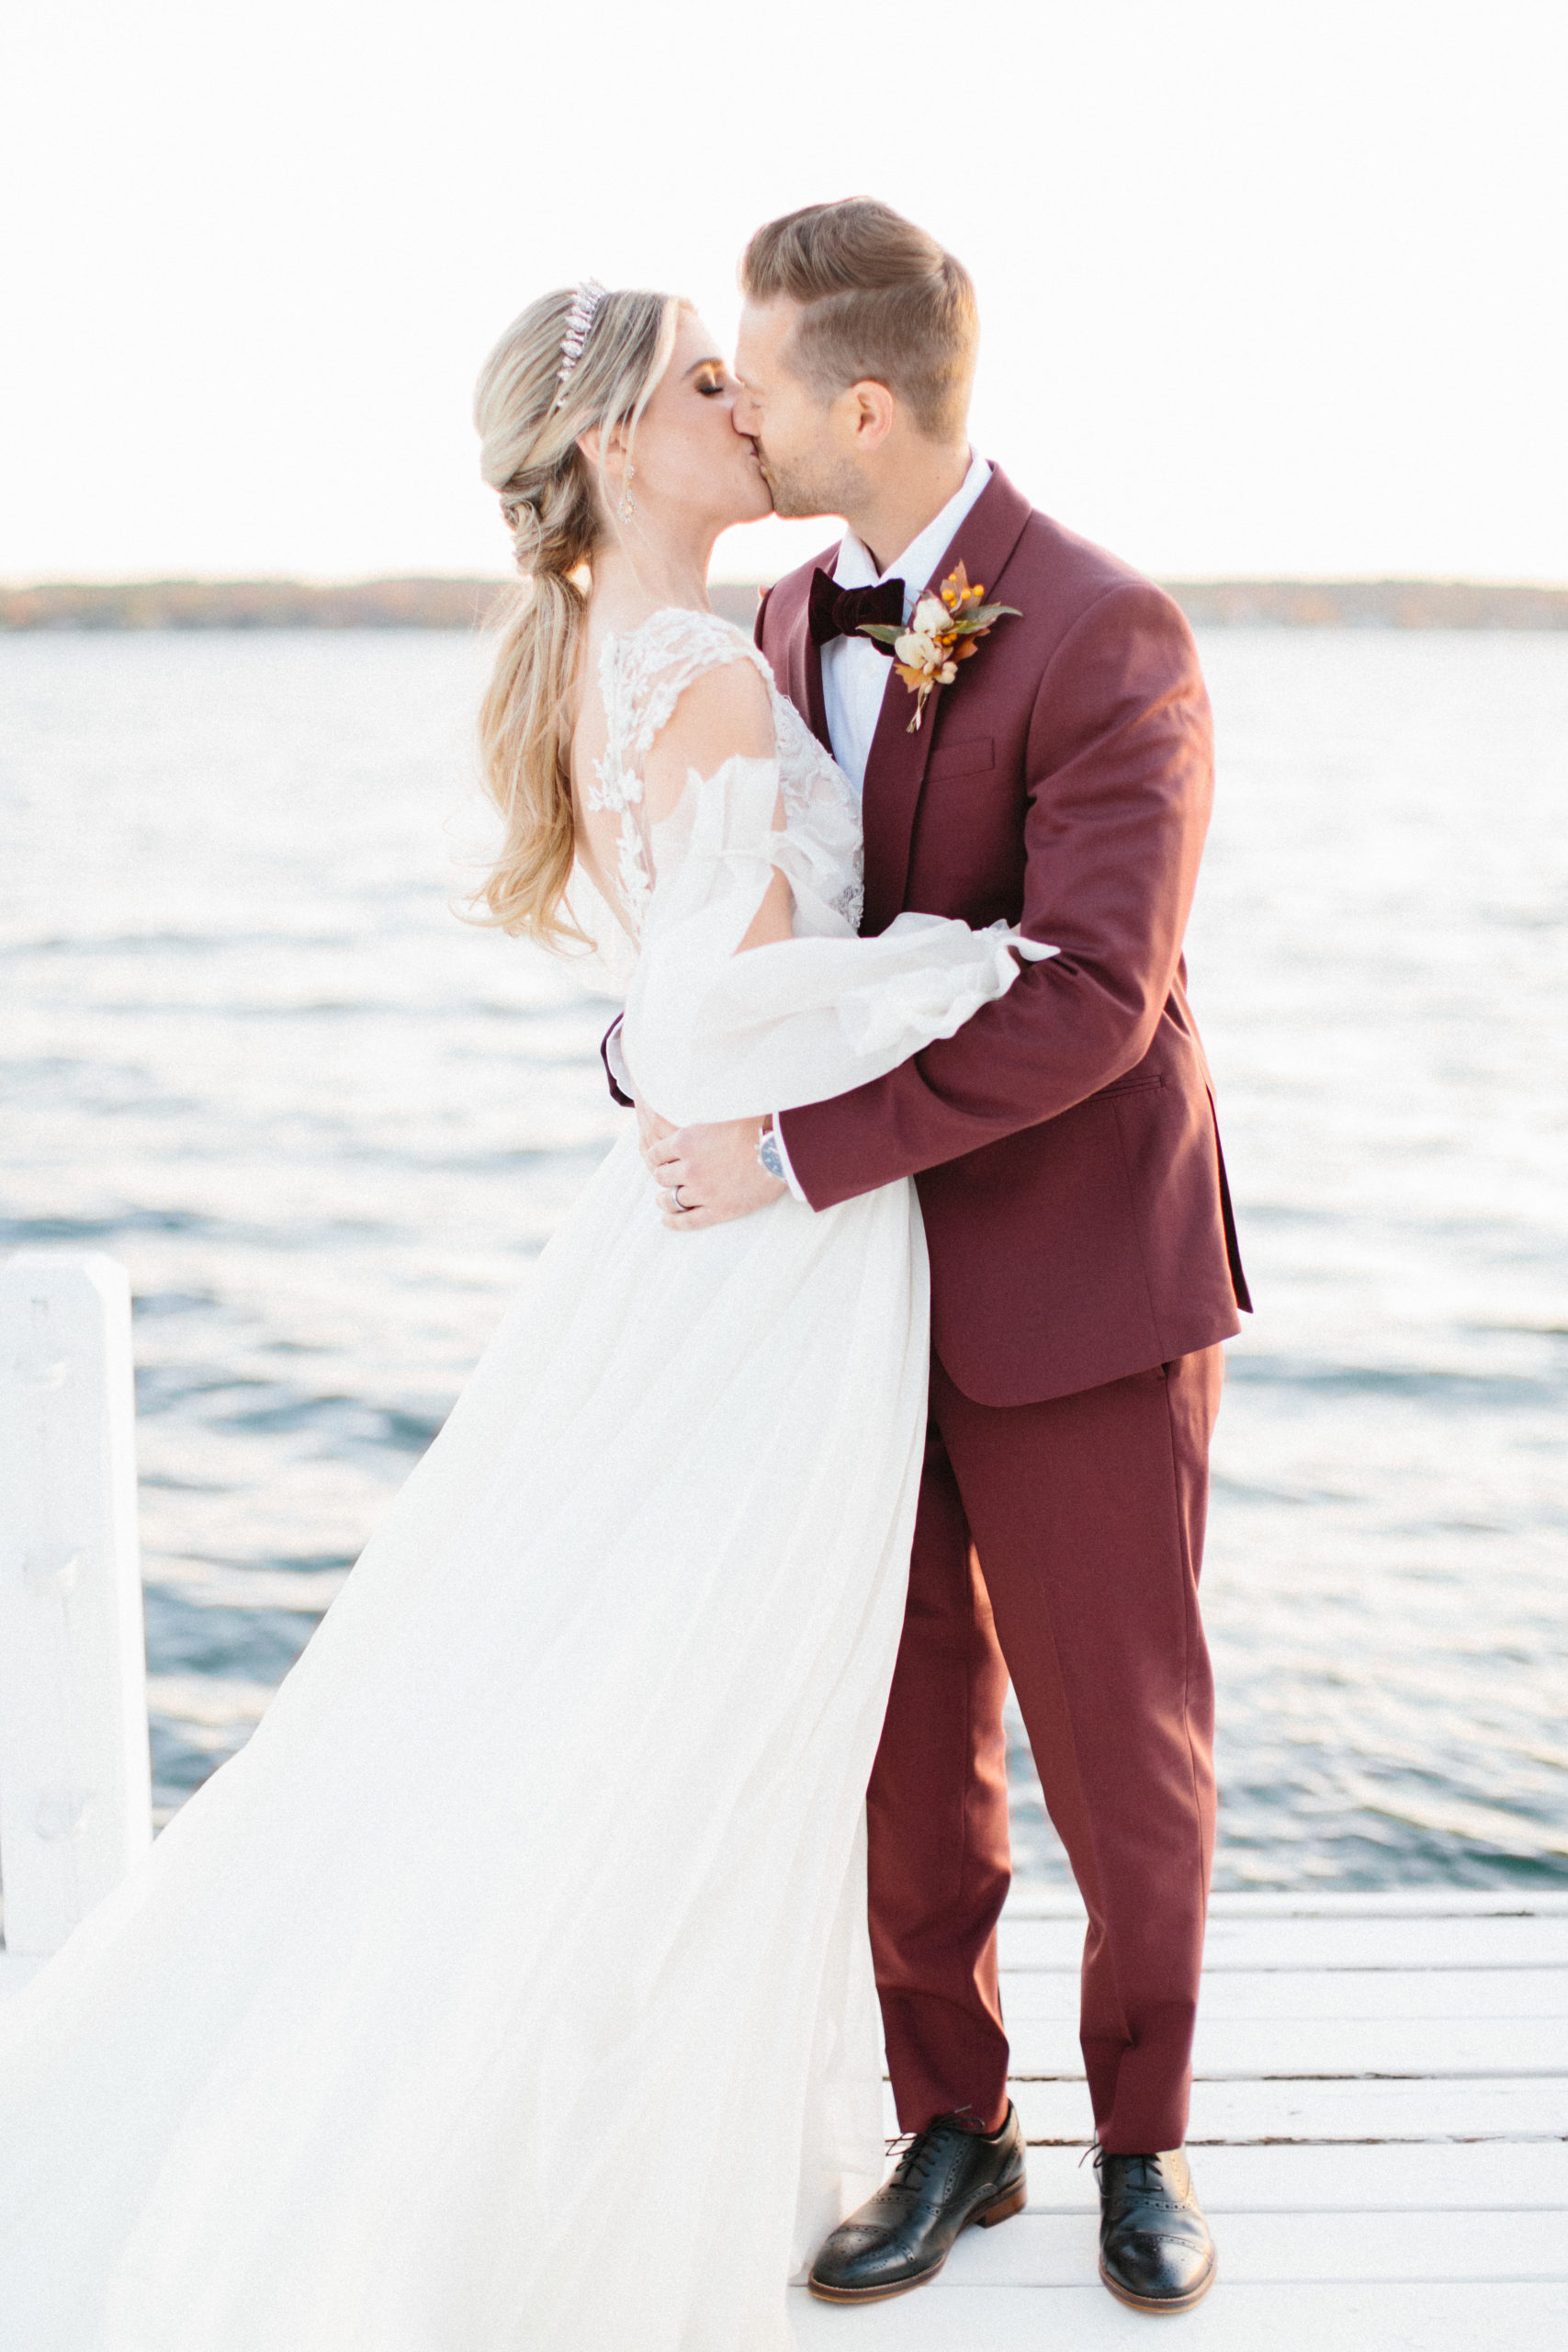 A Romantic Old-world European Inspired Editorial Shoot in Williams Bay